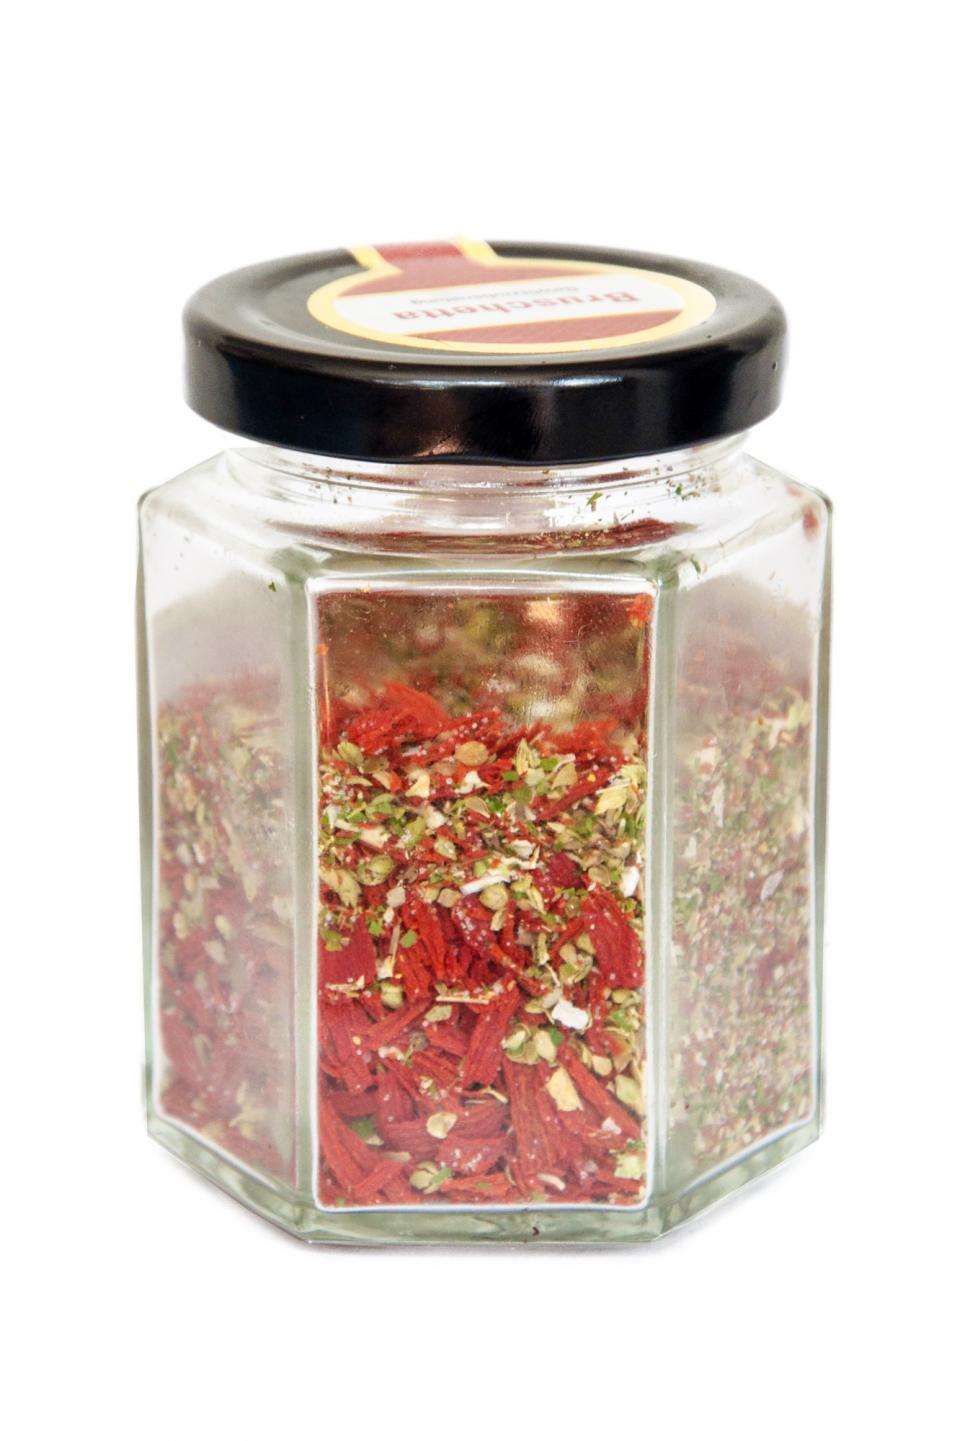 Free Image of Herbs in a jar 